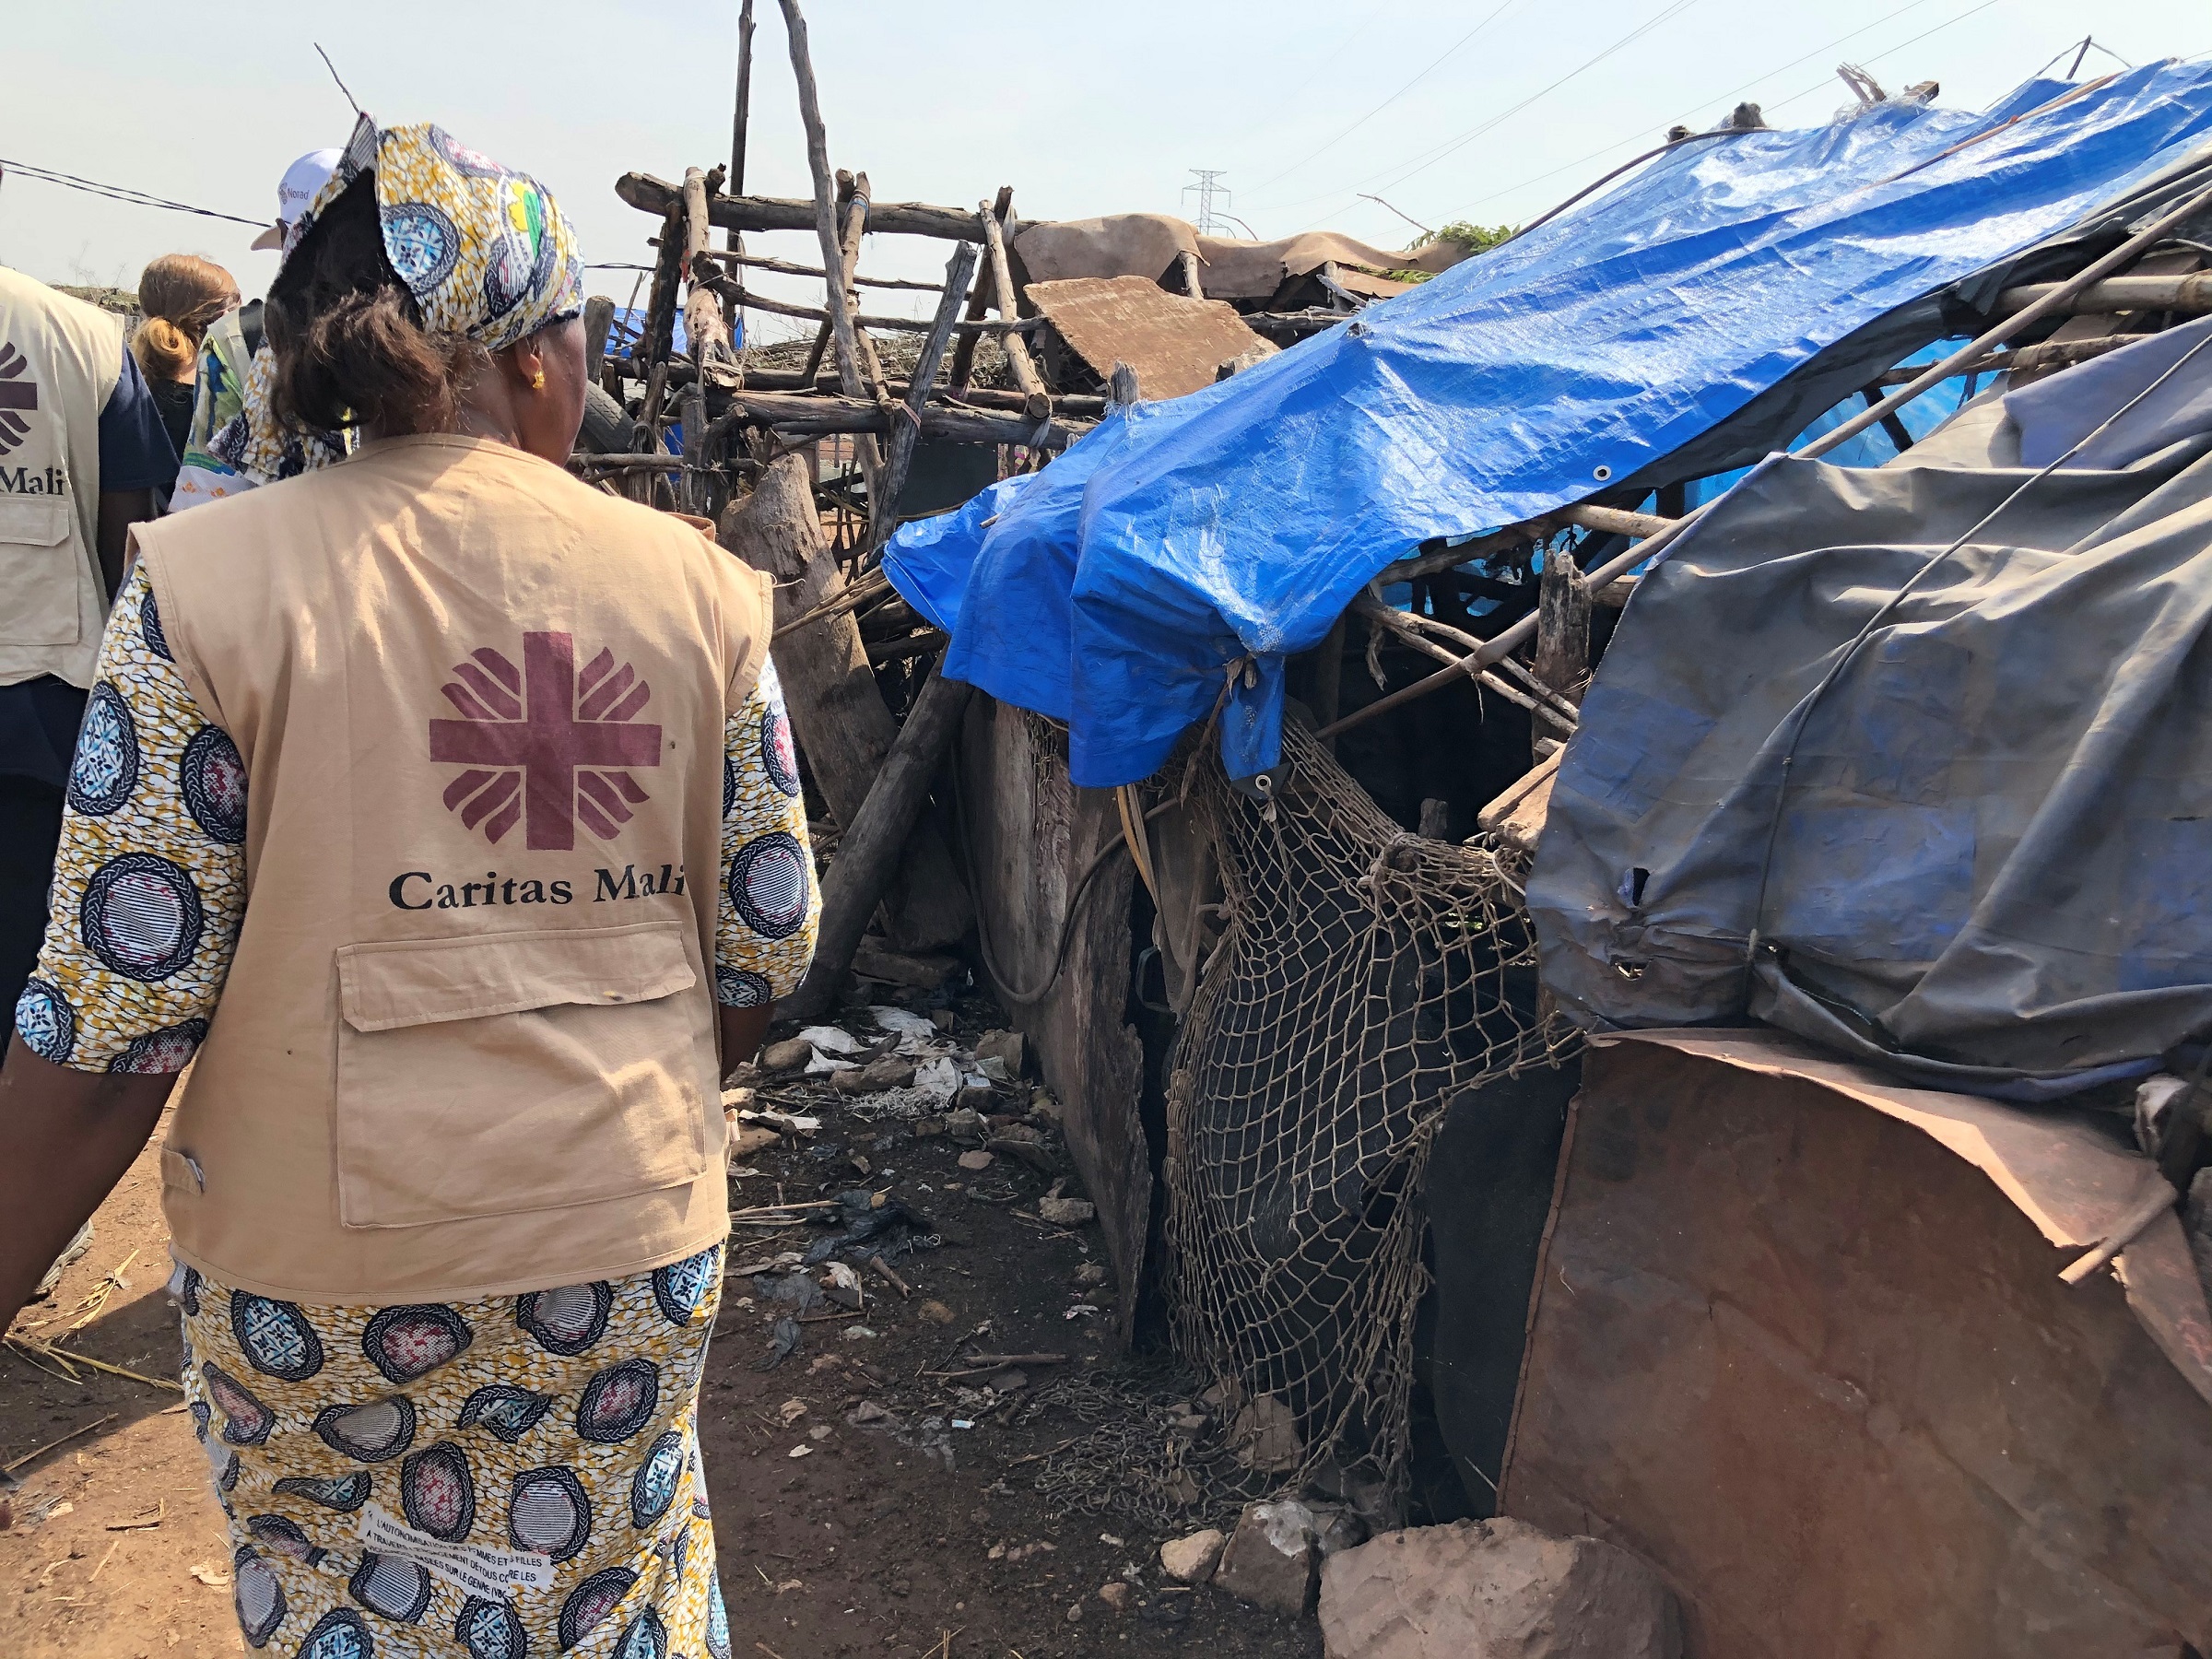 Female aid worker from Caritas Mali visits tent camp with internally displaced people